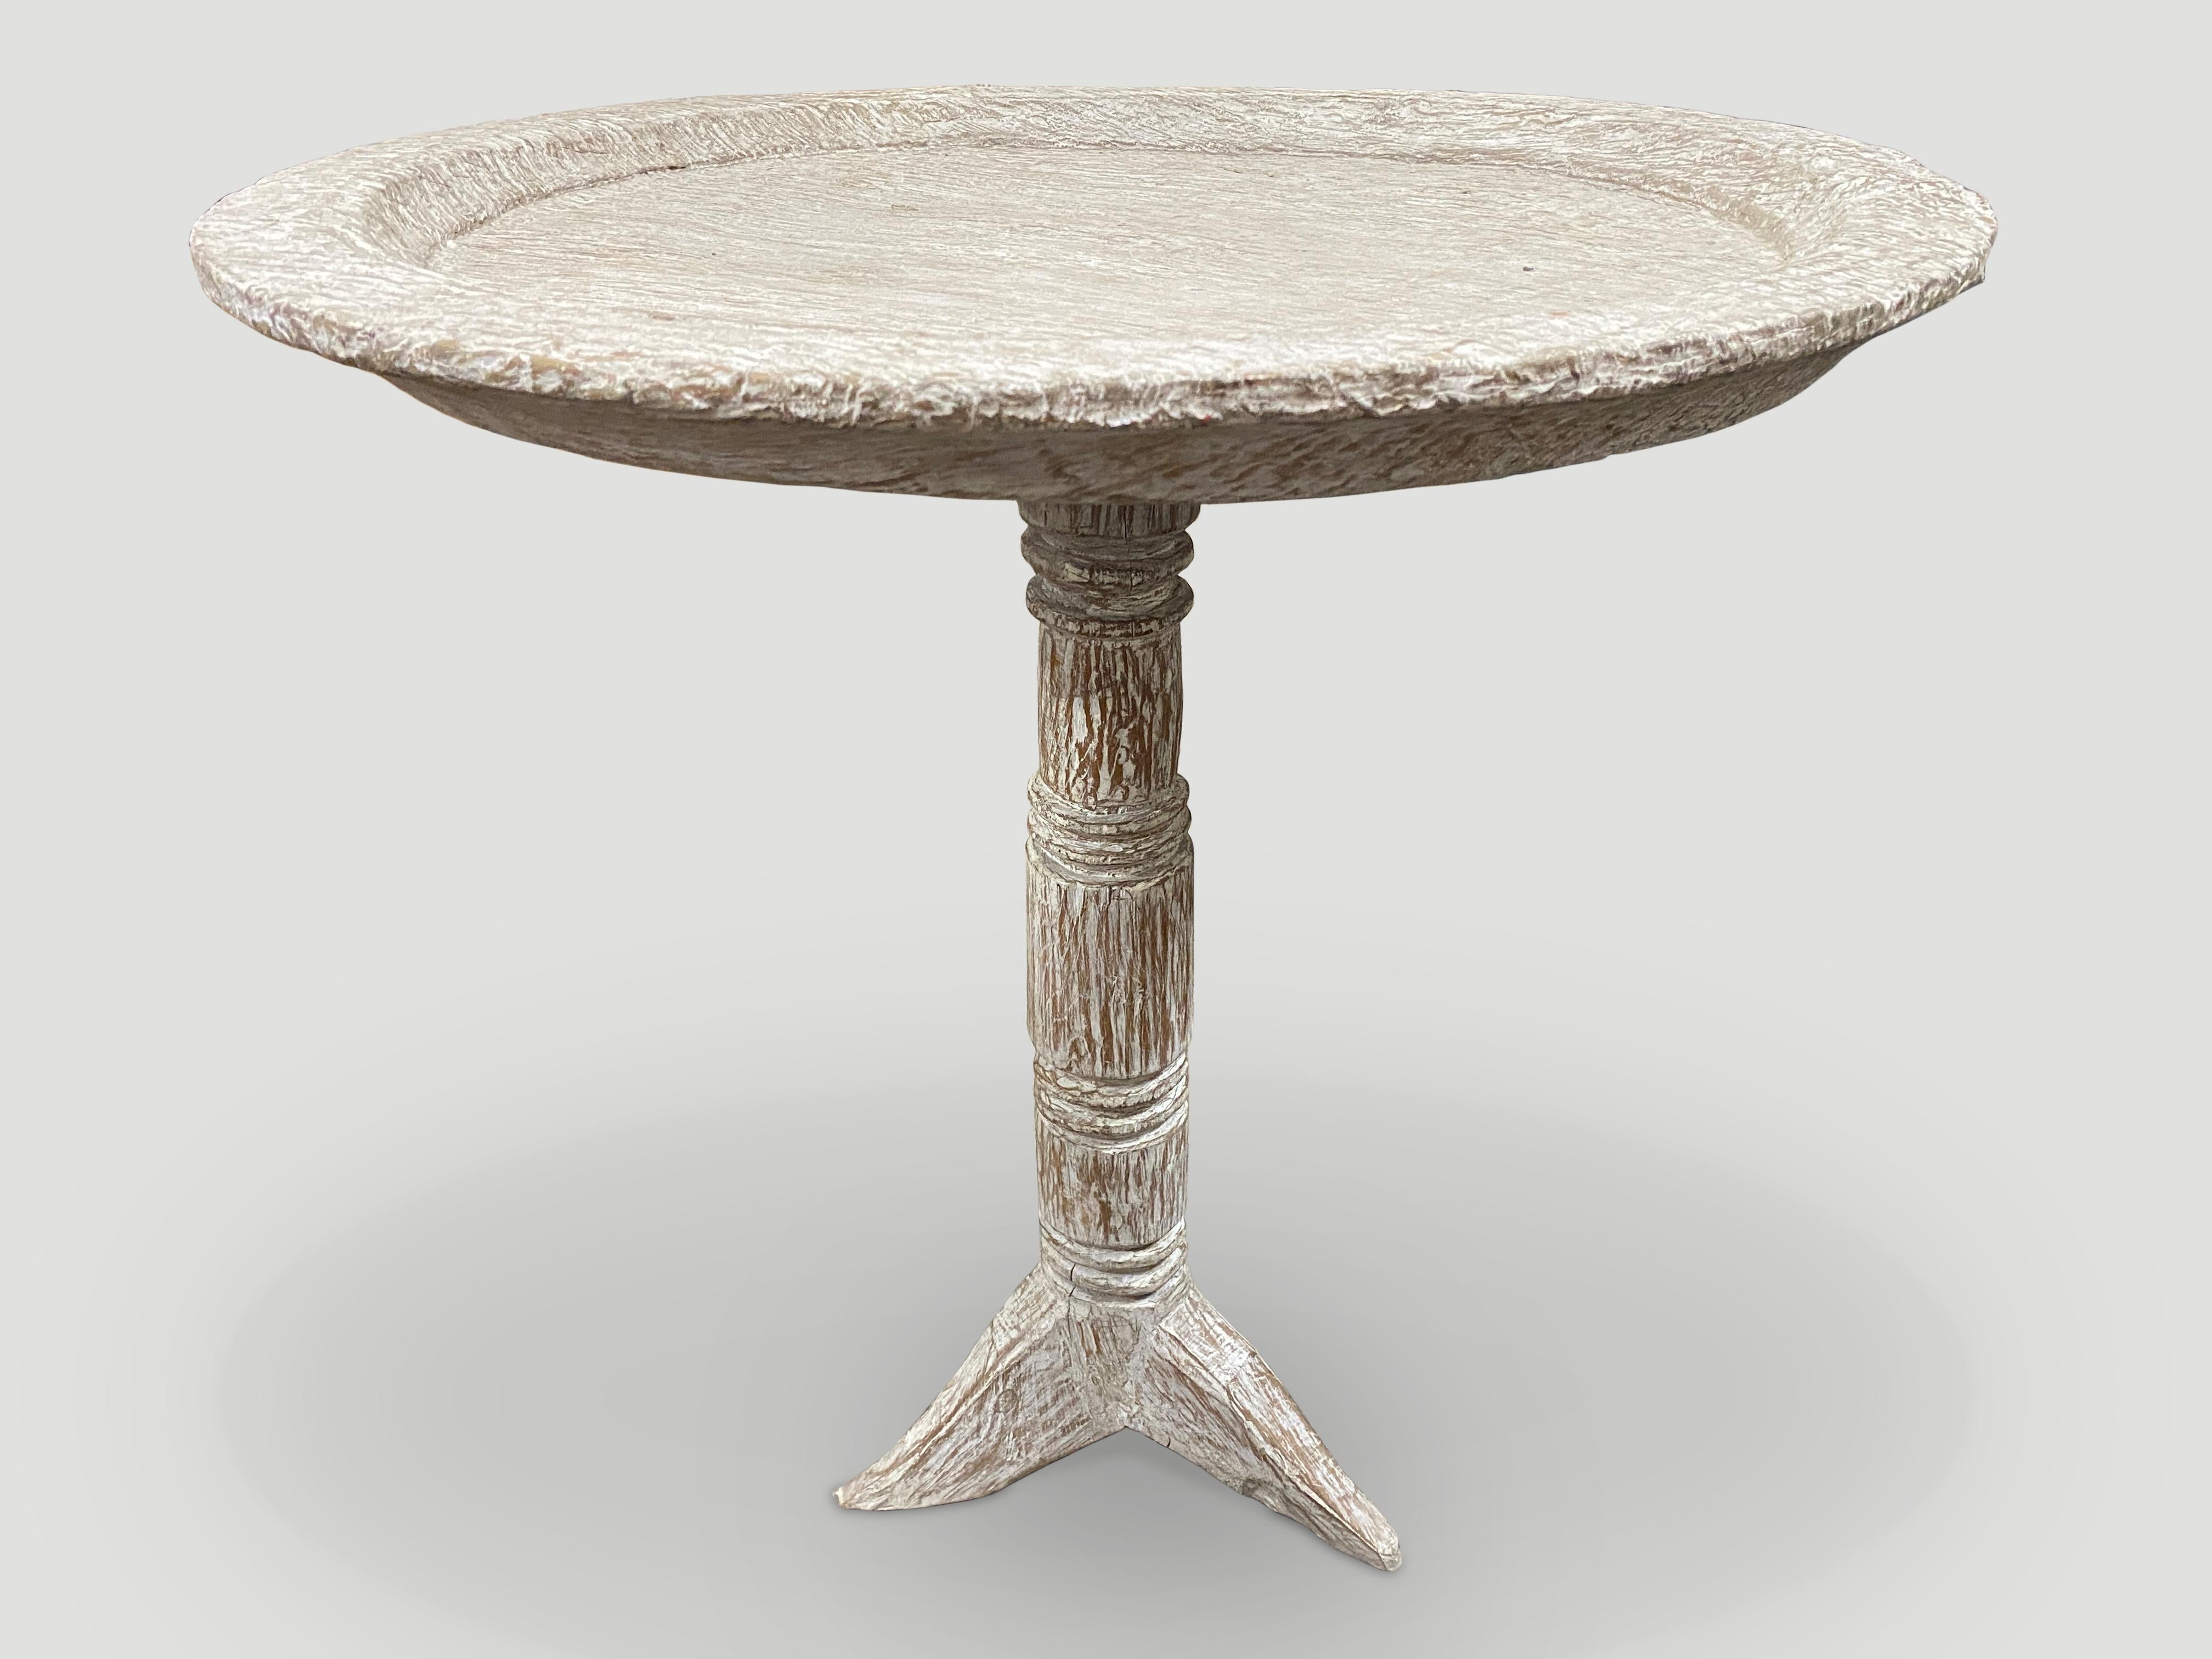 A beautiful antique three inch bevelled tray made from a single piece of wood is added to this hand carved base. Finished with a white washed ceruse revealing the beautiful wood grain. 

The St. Barts Collection features an exciting new line of